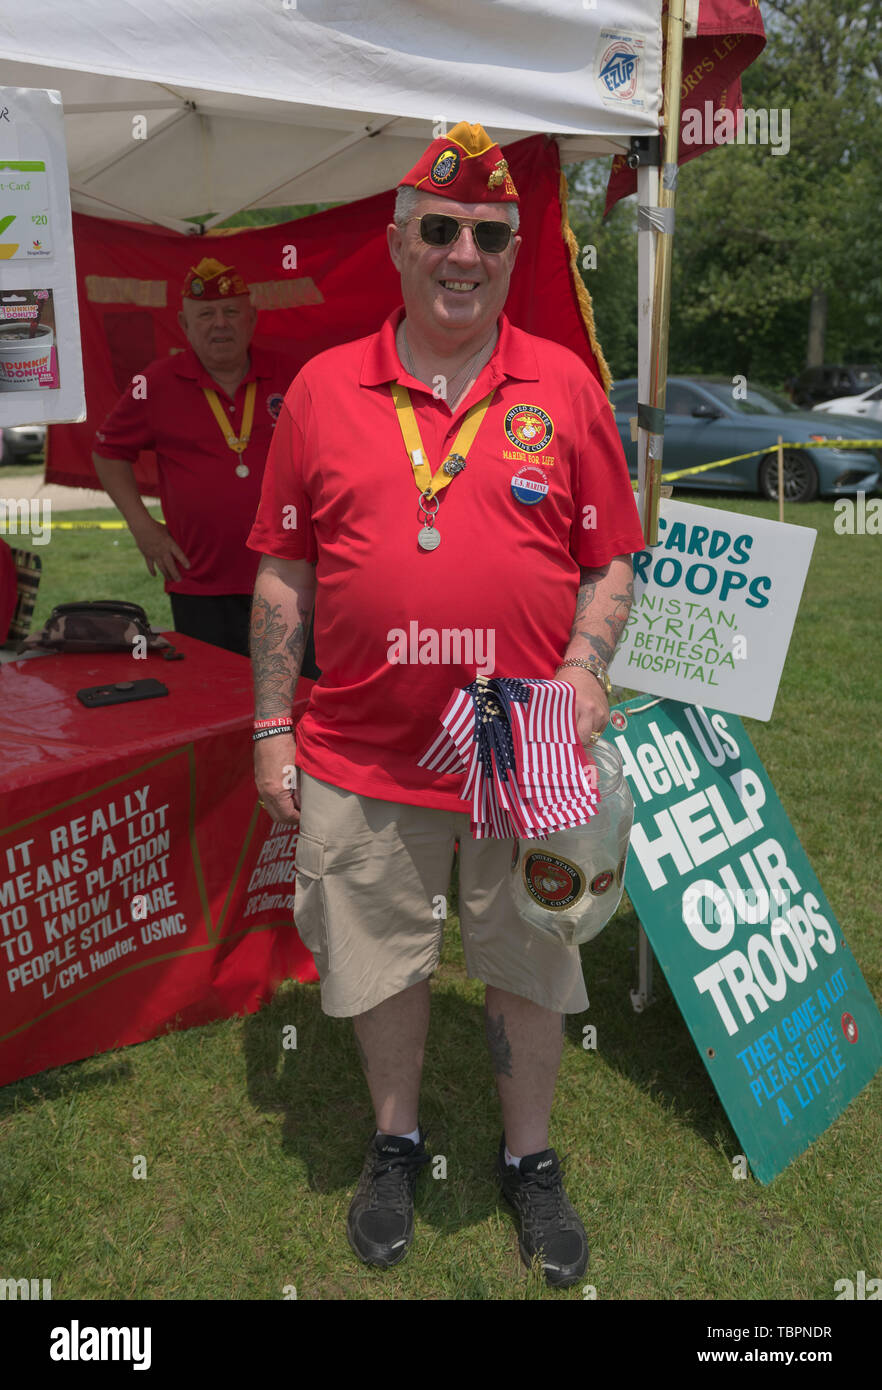 Old Westbury, New York, USA. 2nd June, 2019. PDD Jim Seaman Sr. of the 154 Marine Corps League, Detachment 240, holds small American Flags, and RON STEINER, Commendant of the Detachments is standing behind him, at a booth to raise funds to help U.S. Troops, at the 53rd Annual Spring Meet Antique Car Show, sponsored by the Greater NY Region (NYGR) of the Antique Car Club of America (AACA), at Old Westbury Gardens, a Long Island Gold Coast estate. Credit: Ann Parry/ZUMA Wire/Alamy Live News Stock Photo